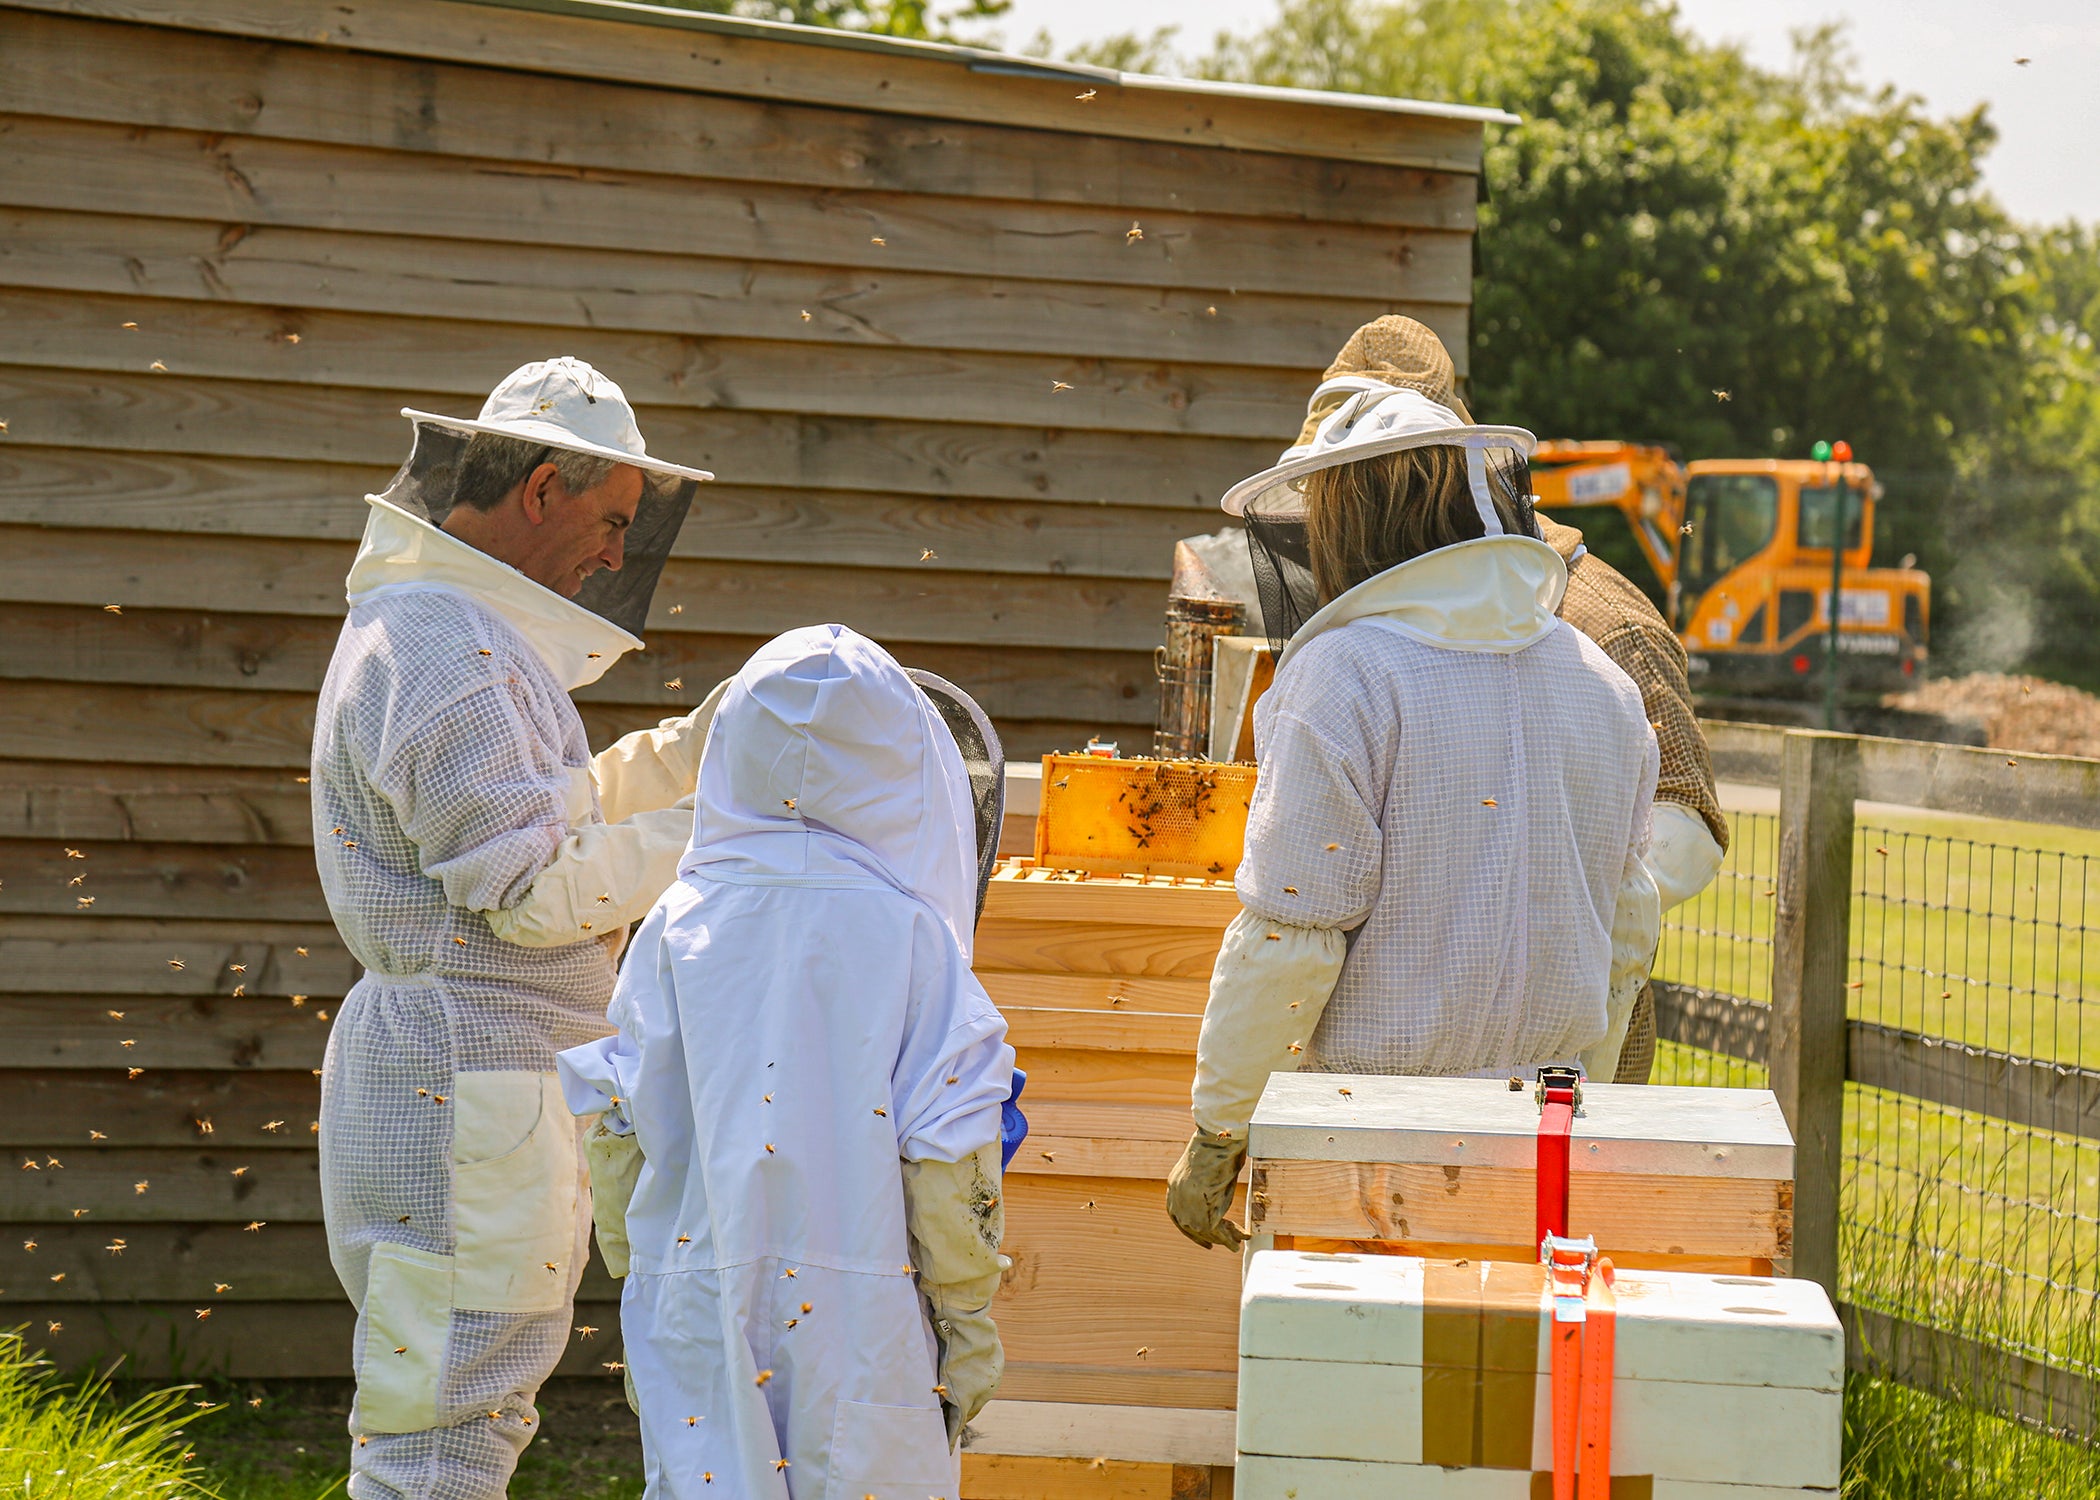 GIFT CARD - Parent & Child - Bee Keeping Experience - Essex